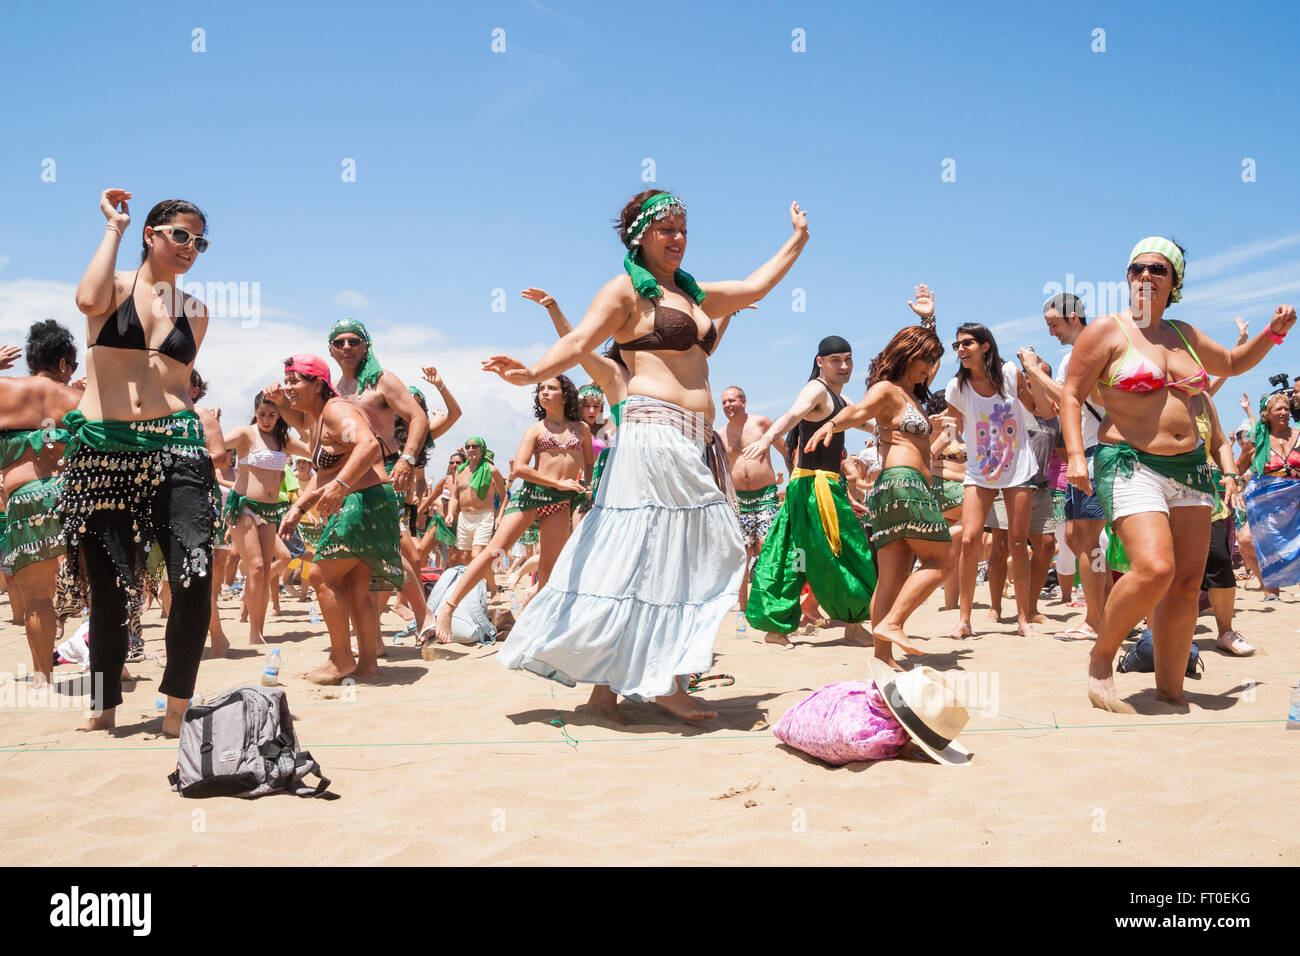 Dancers setting a Guinness world record for most people simultaneously Belly Dancing Stock Photo